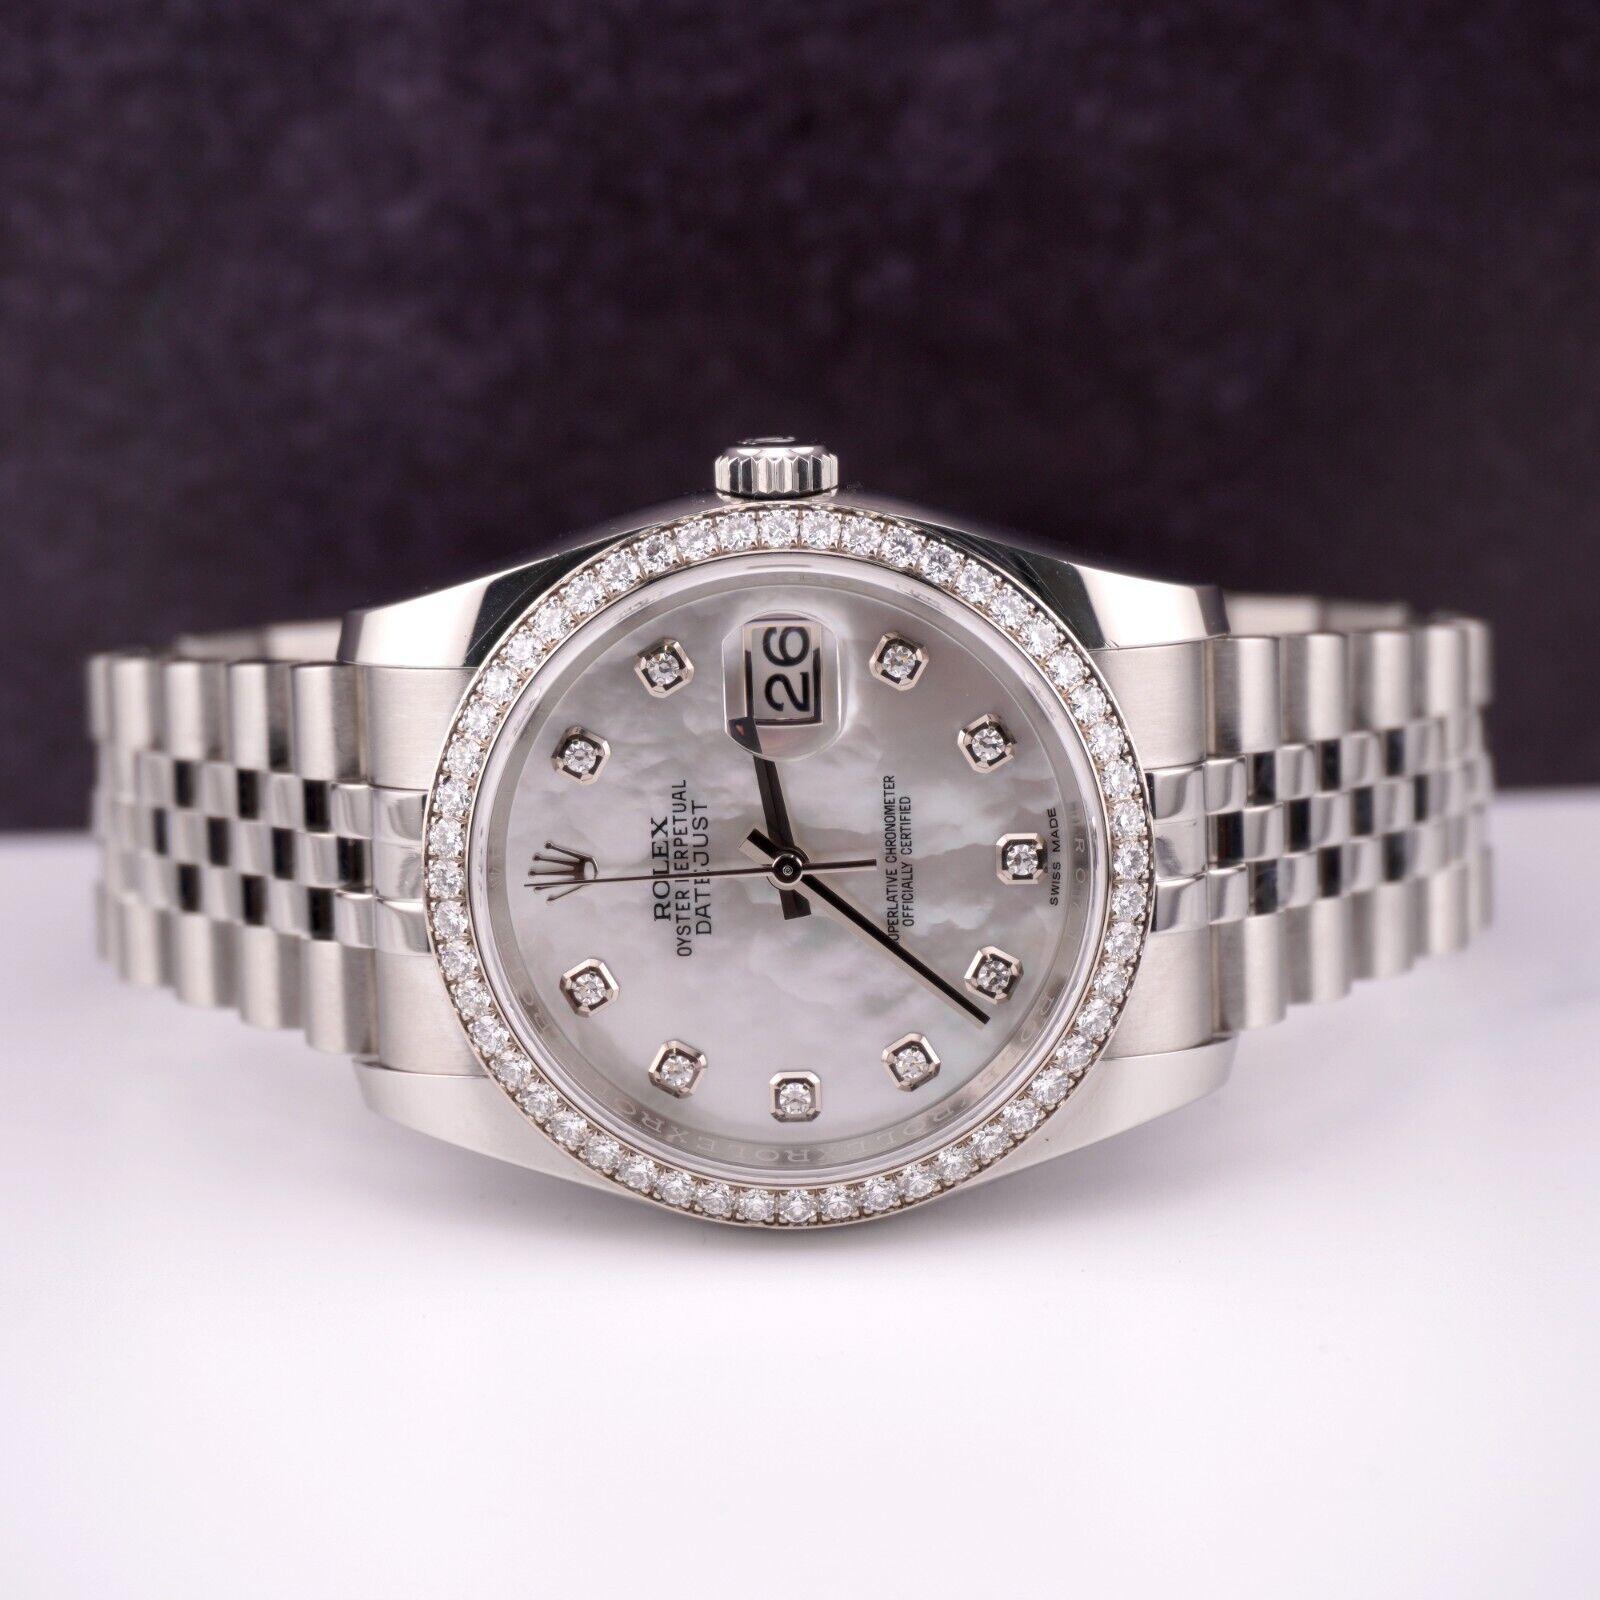 Rolex Datejust 36mm Watch

Pre-owned w/ Original Box & Card
100% Authentic Authenticity Card
Condition - (Excellent Condition) - See Pics
Watch Reference - 116244
Model - Datejust
Dial Color - White MOP
Material - Stainless Steel
Watch Will Fit